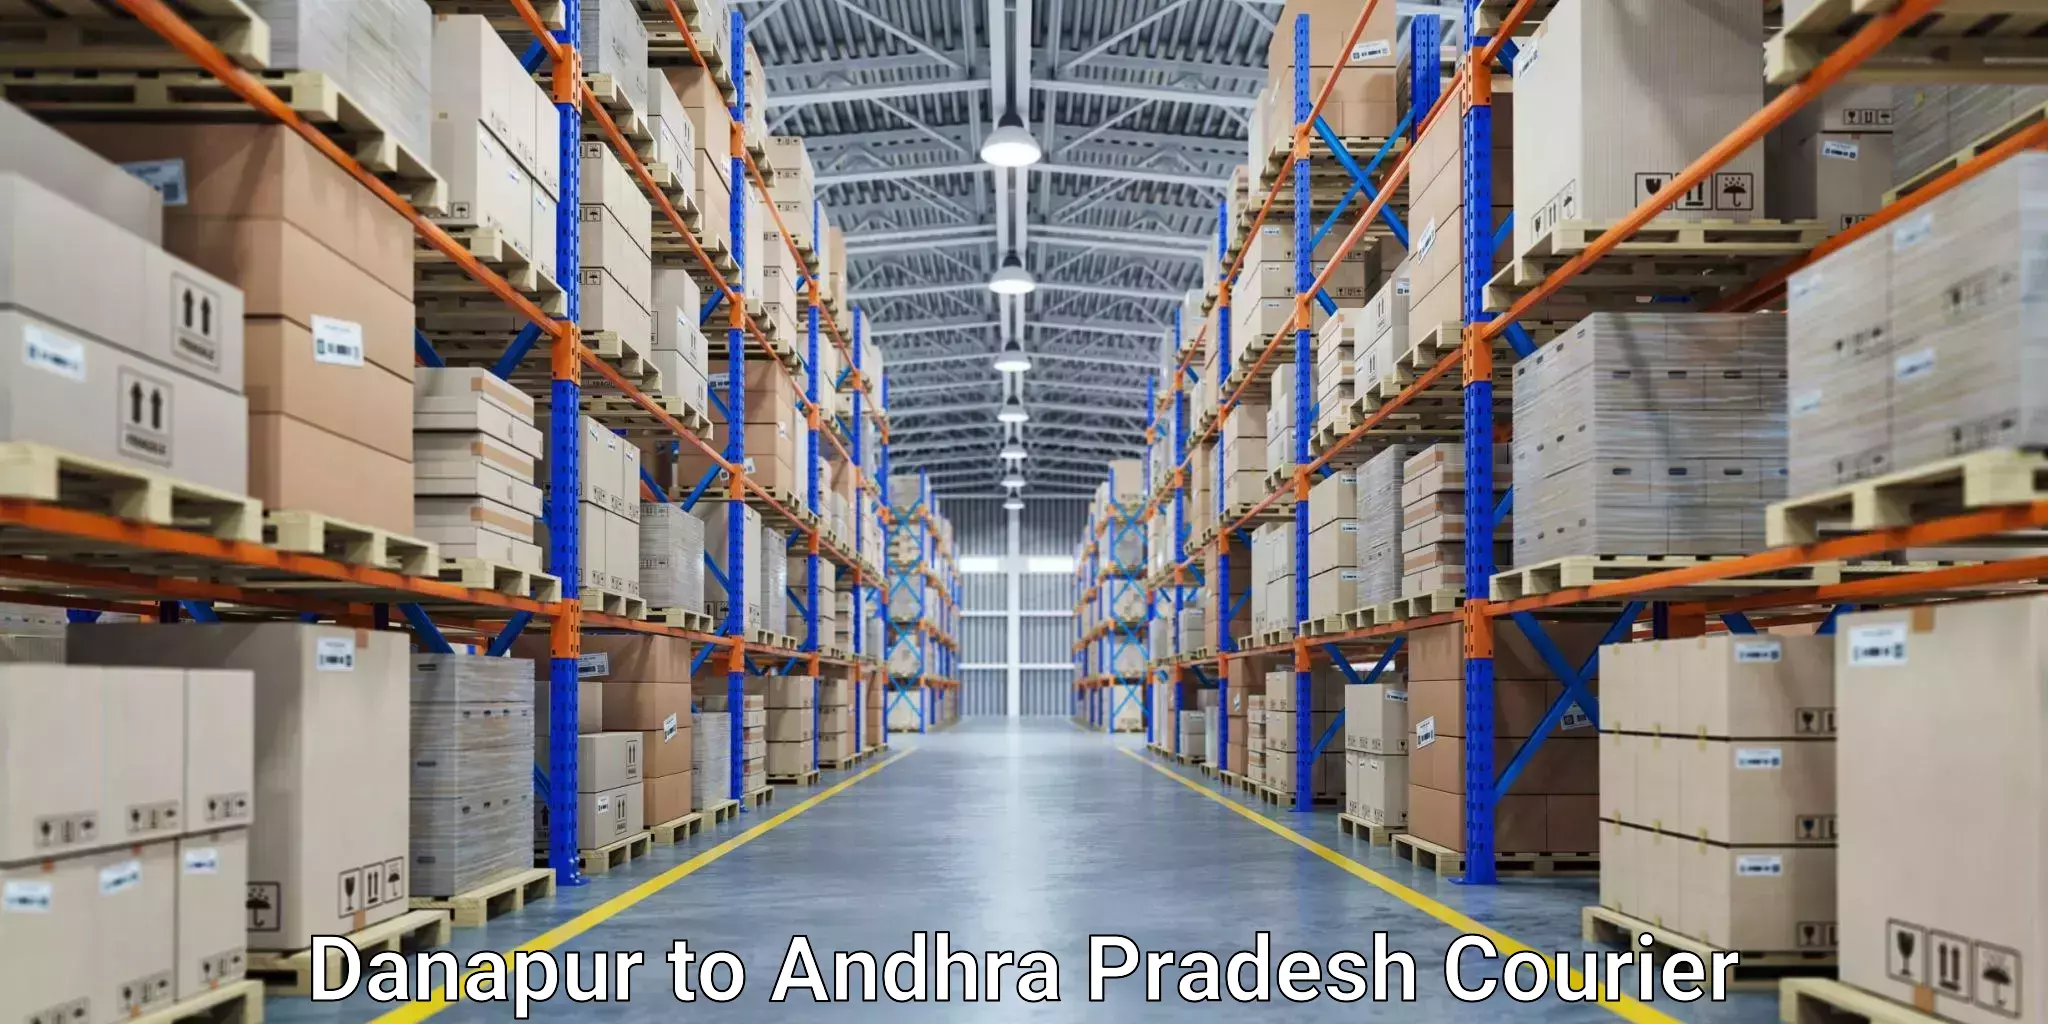 Fast-track shipping solutions in Danapur to Visakhapatnam